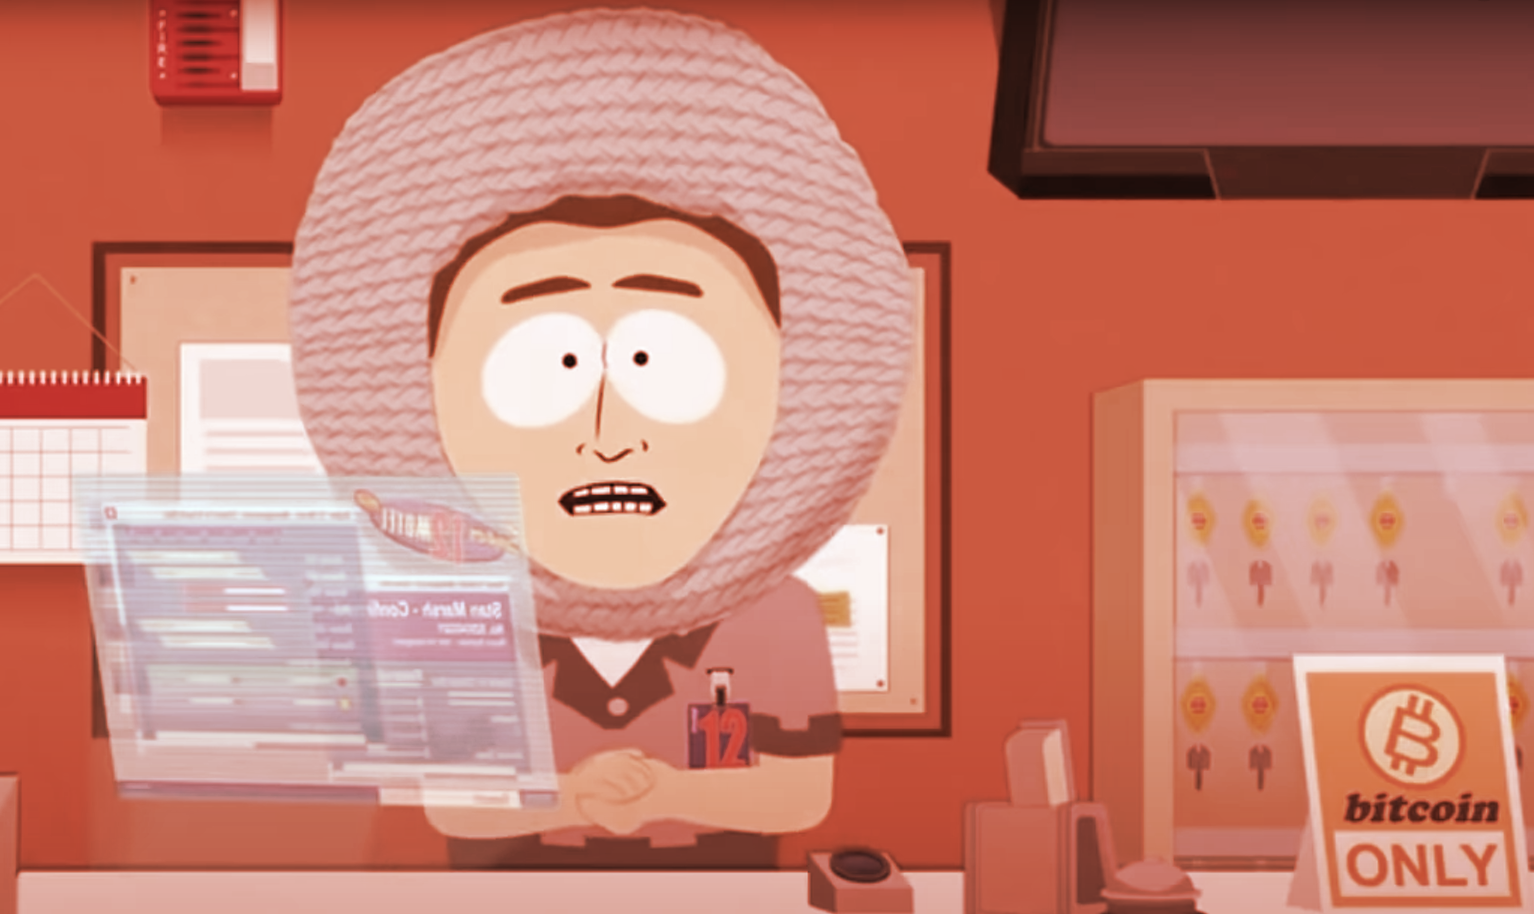 South Park's Latest Episode Mocks 'Bitcoin-Only' Future